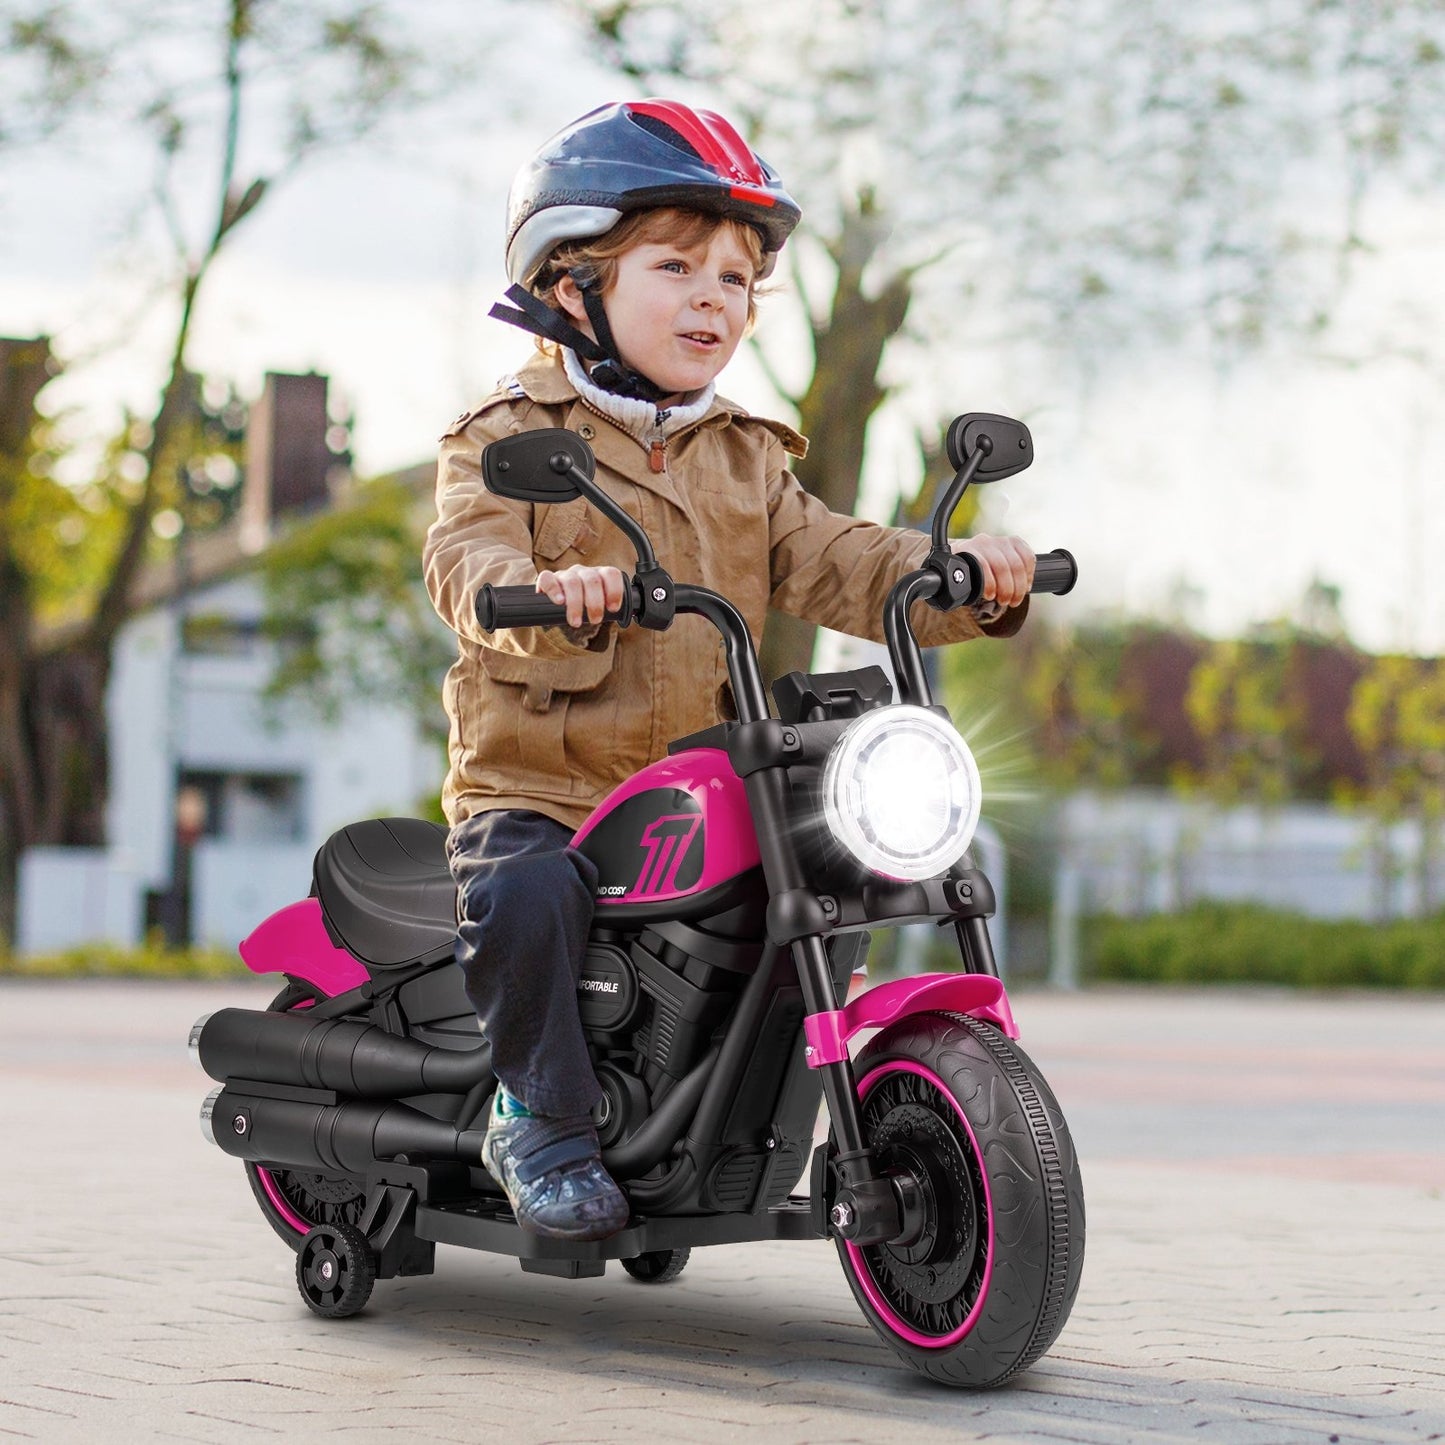 Kids Electric Motorcycle with Training Wheels and LED Headlights, Pink